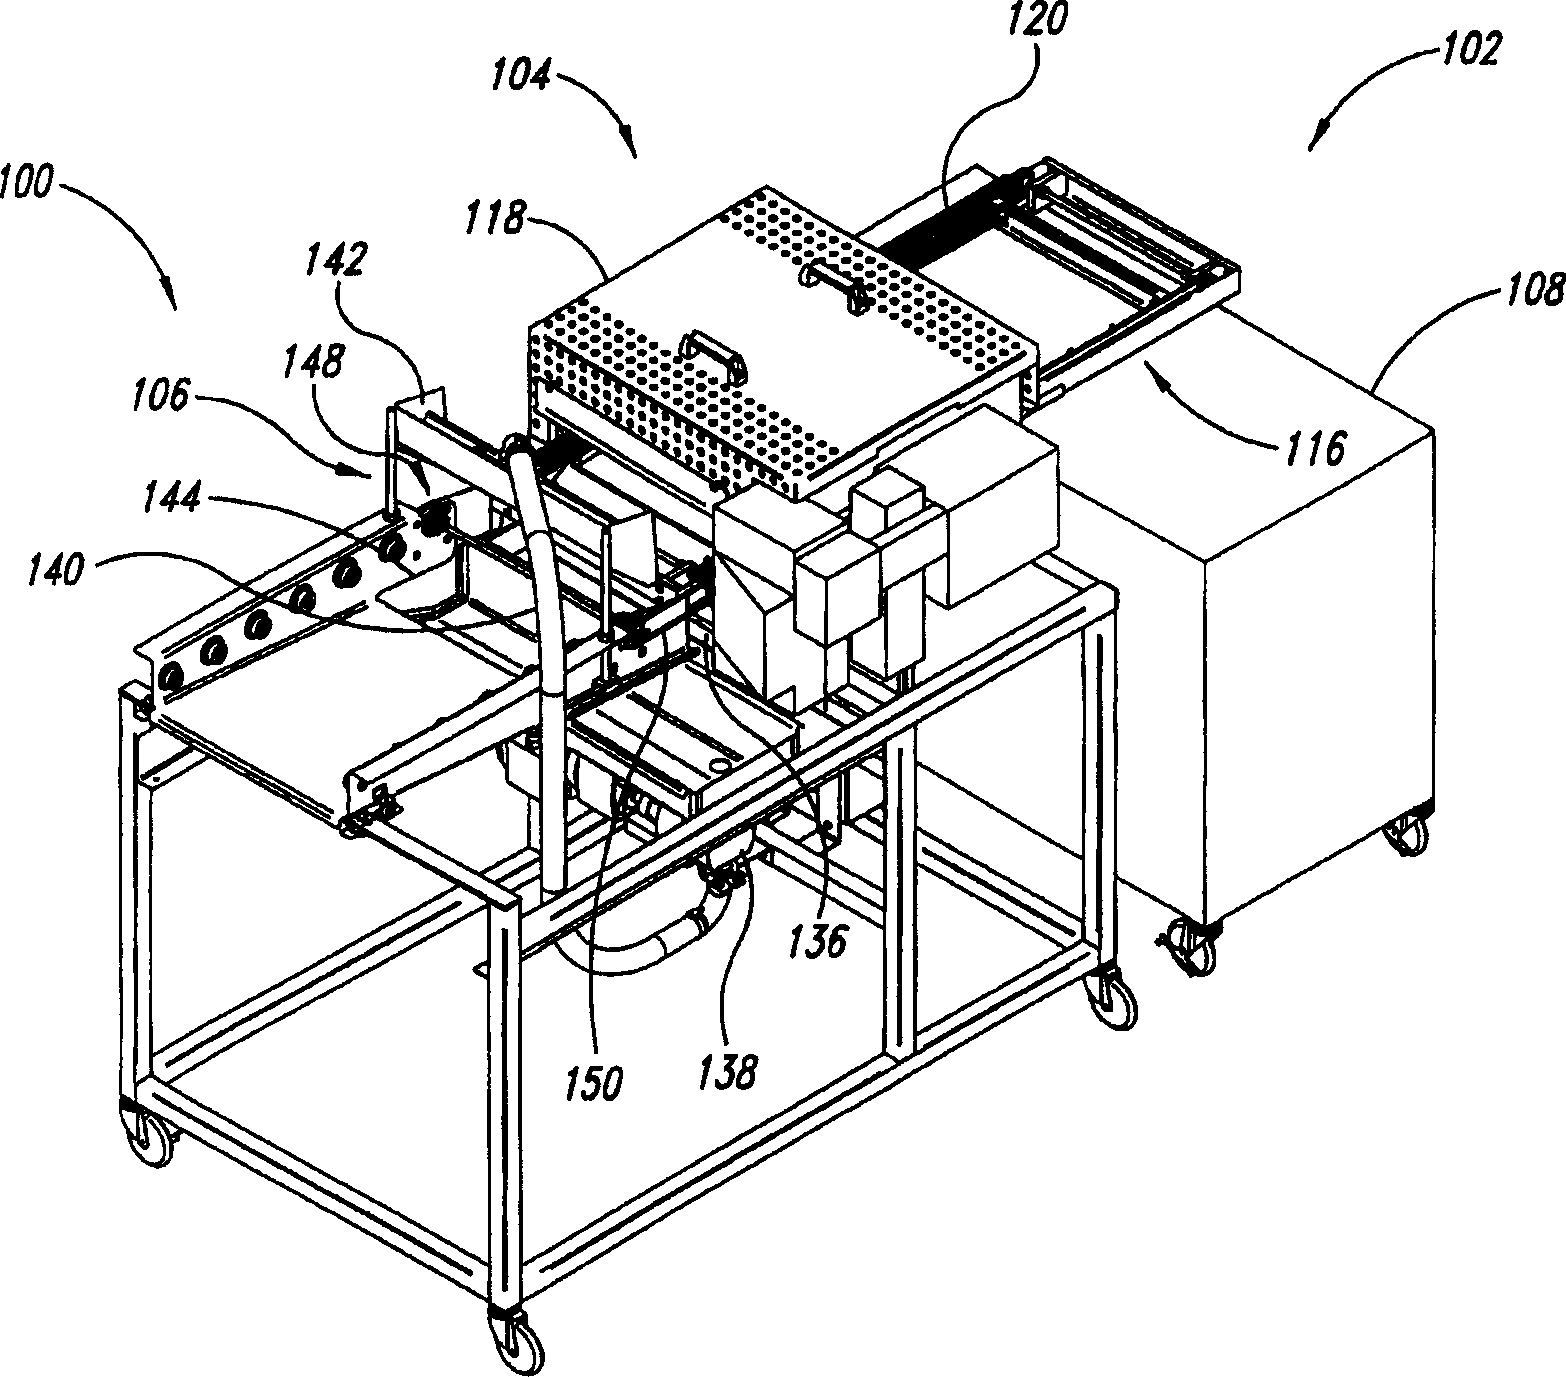 Devices, systems and methods for thawing, heating and/or glazing previously frozen baked goods or dough-based products